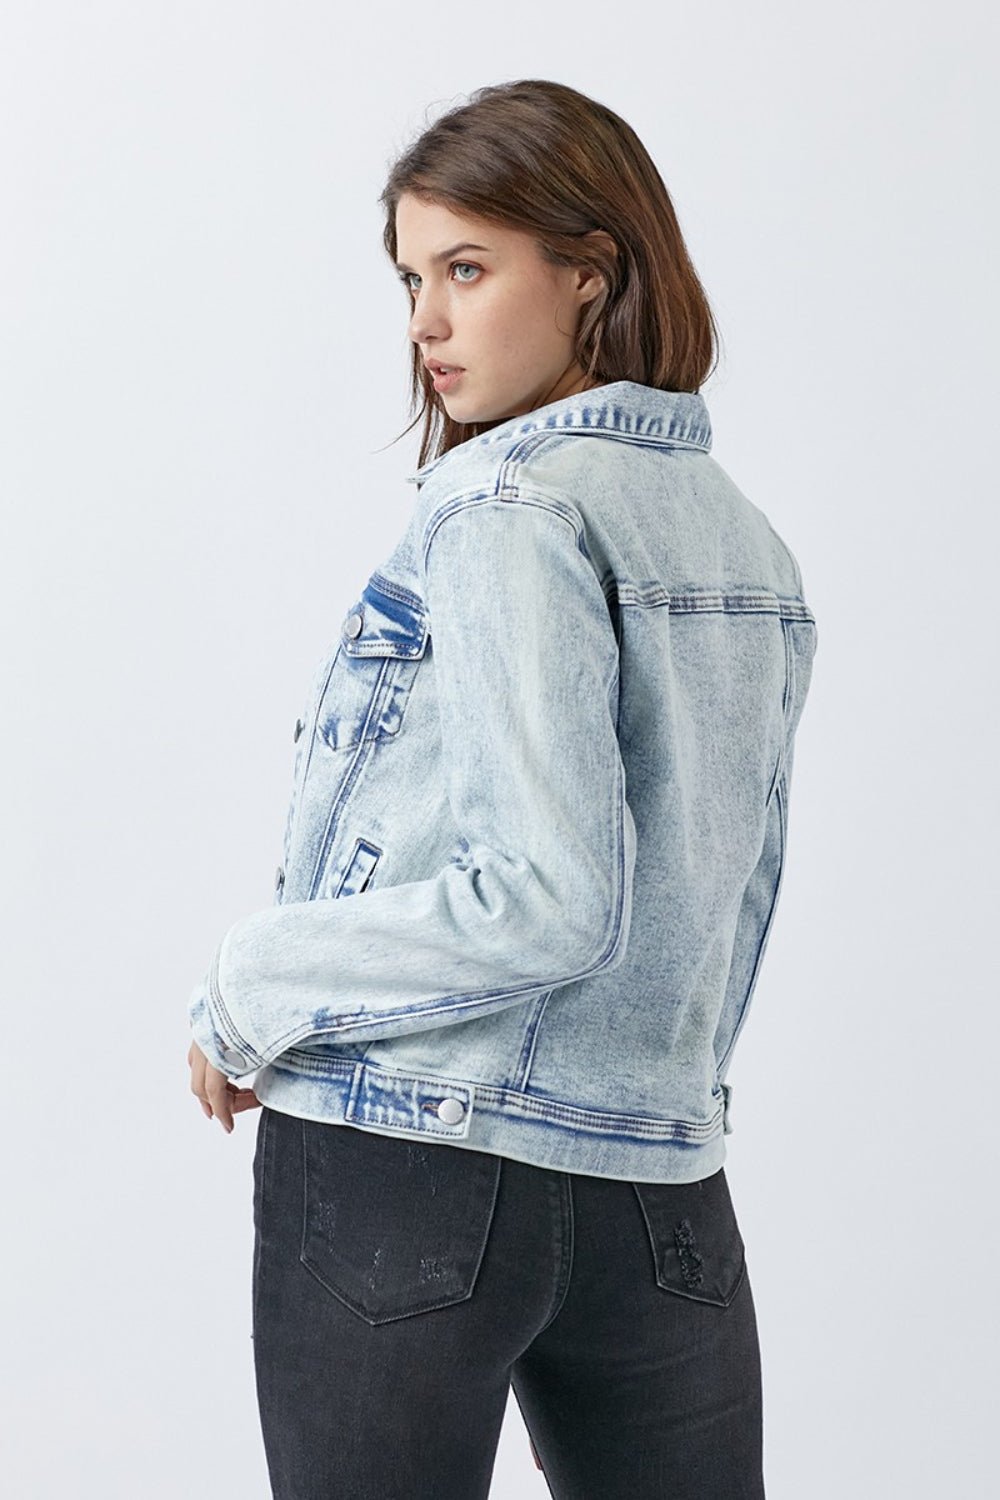 RISEN Button Up Washed Denim Jacket - Happily Ever Atchison Shop Co.